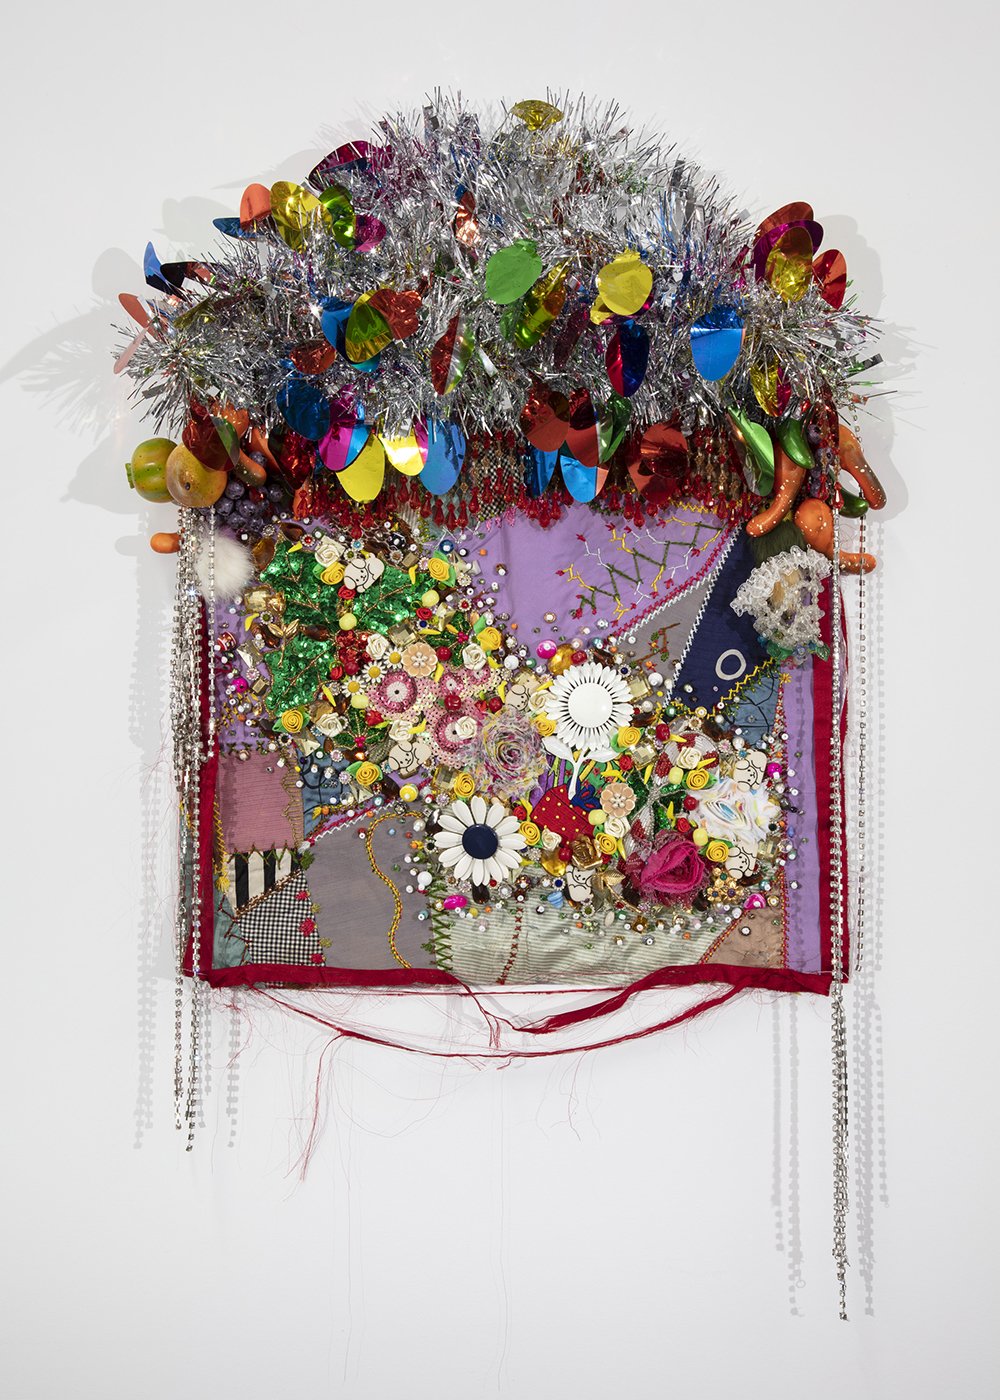   Shroud #3 (study),  2022, Found ‘Crazy’ quilt ca. 1900, trim, fabric flowers, garland, costume jewelry, buttons, plastic flowers and fruit, beads, sequins, thread, fabric, pine, 33 x 21 x 5” 